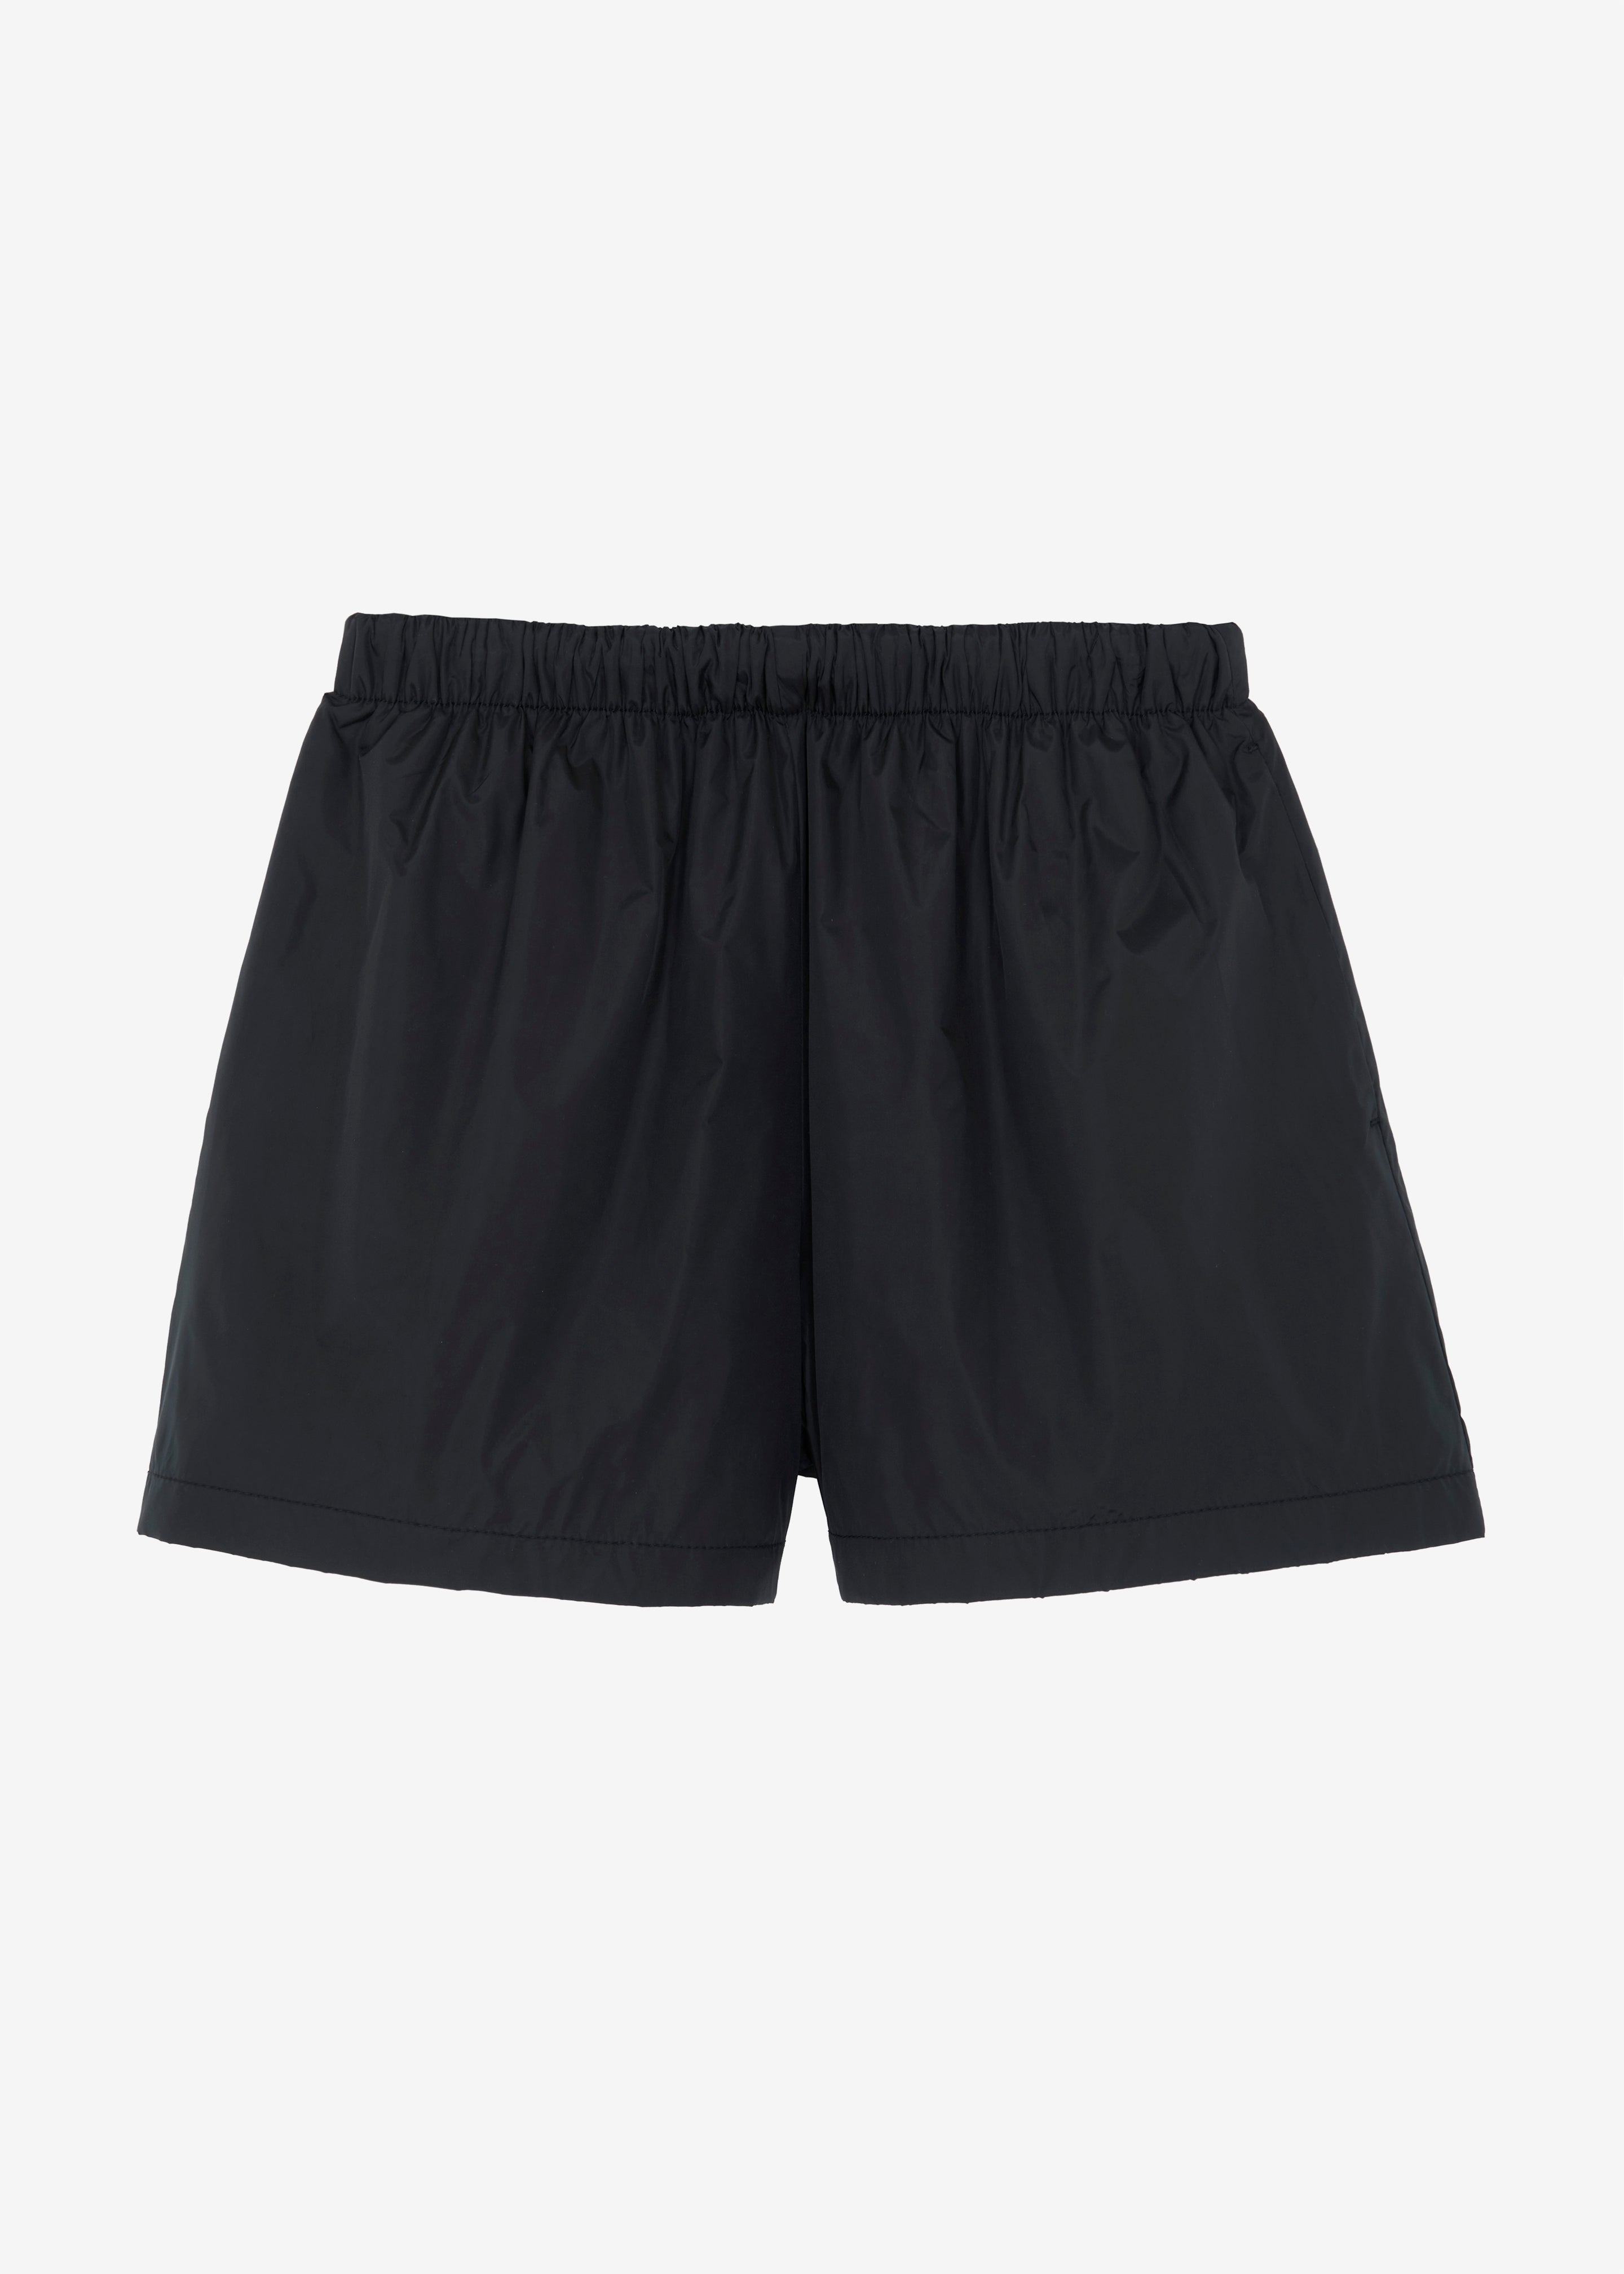 Lucy Shorts - Black - 8